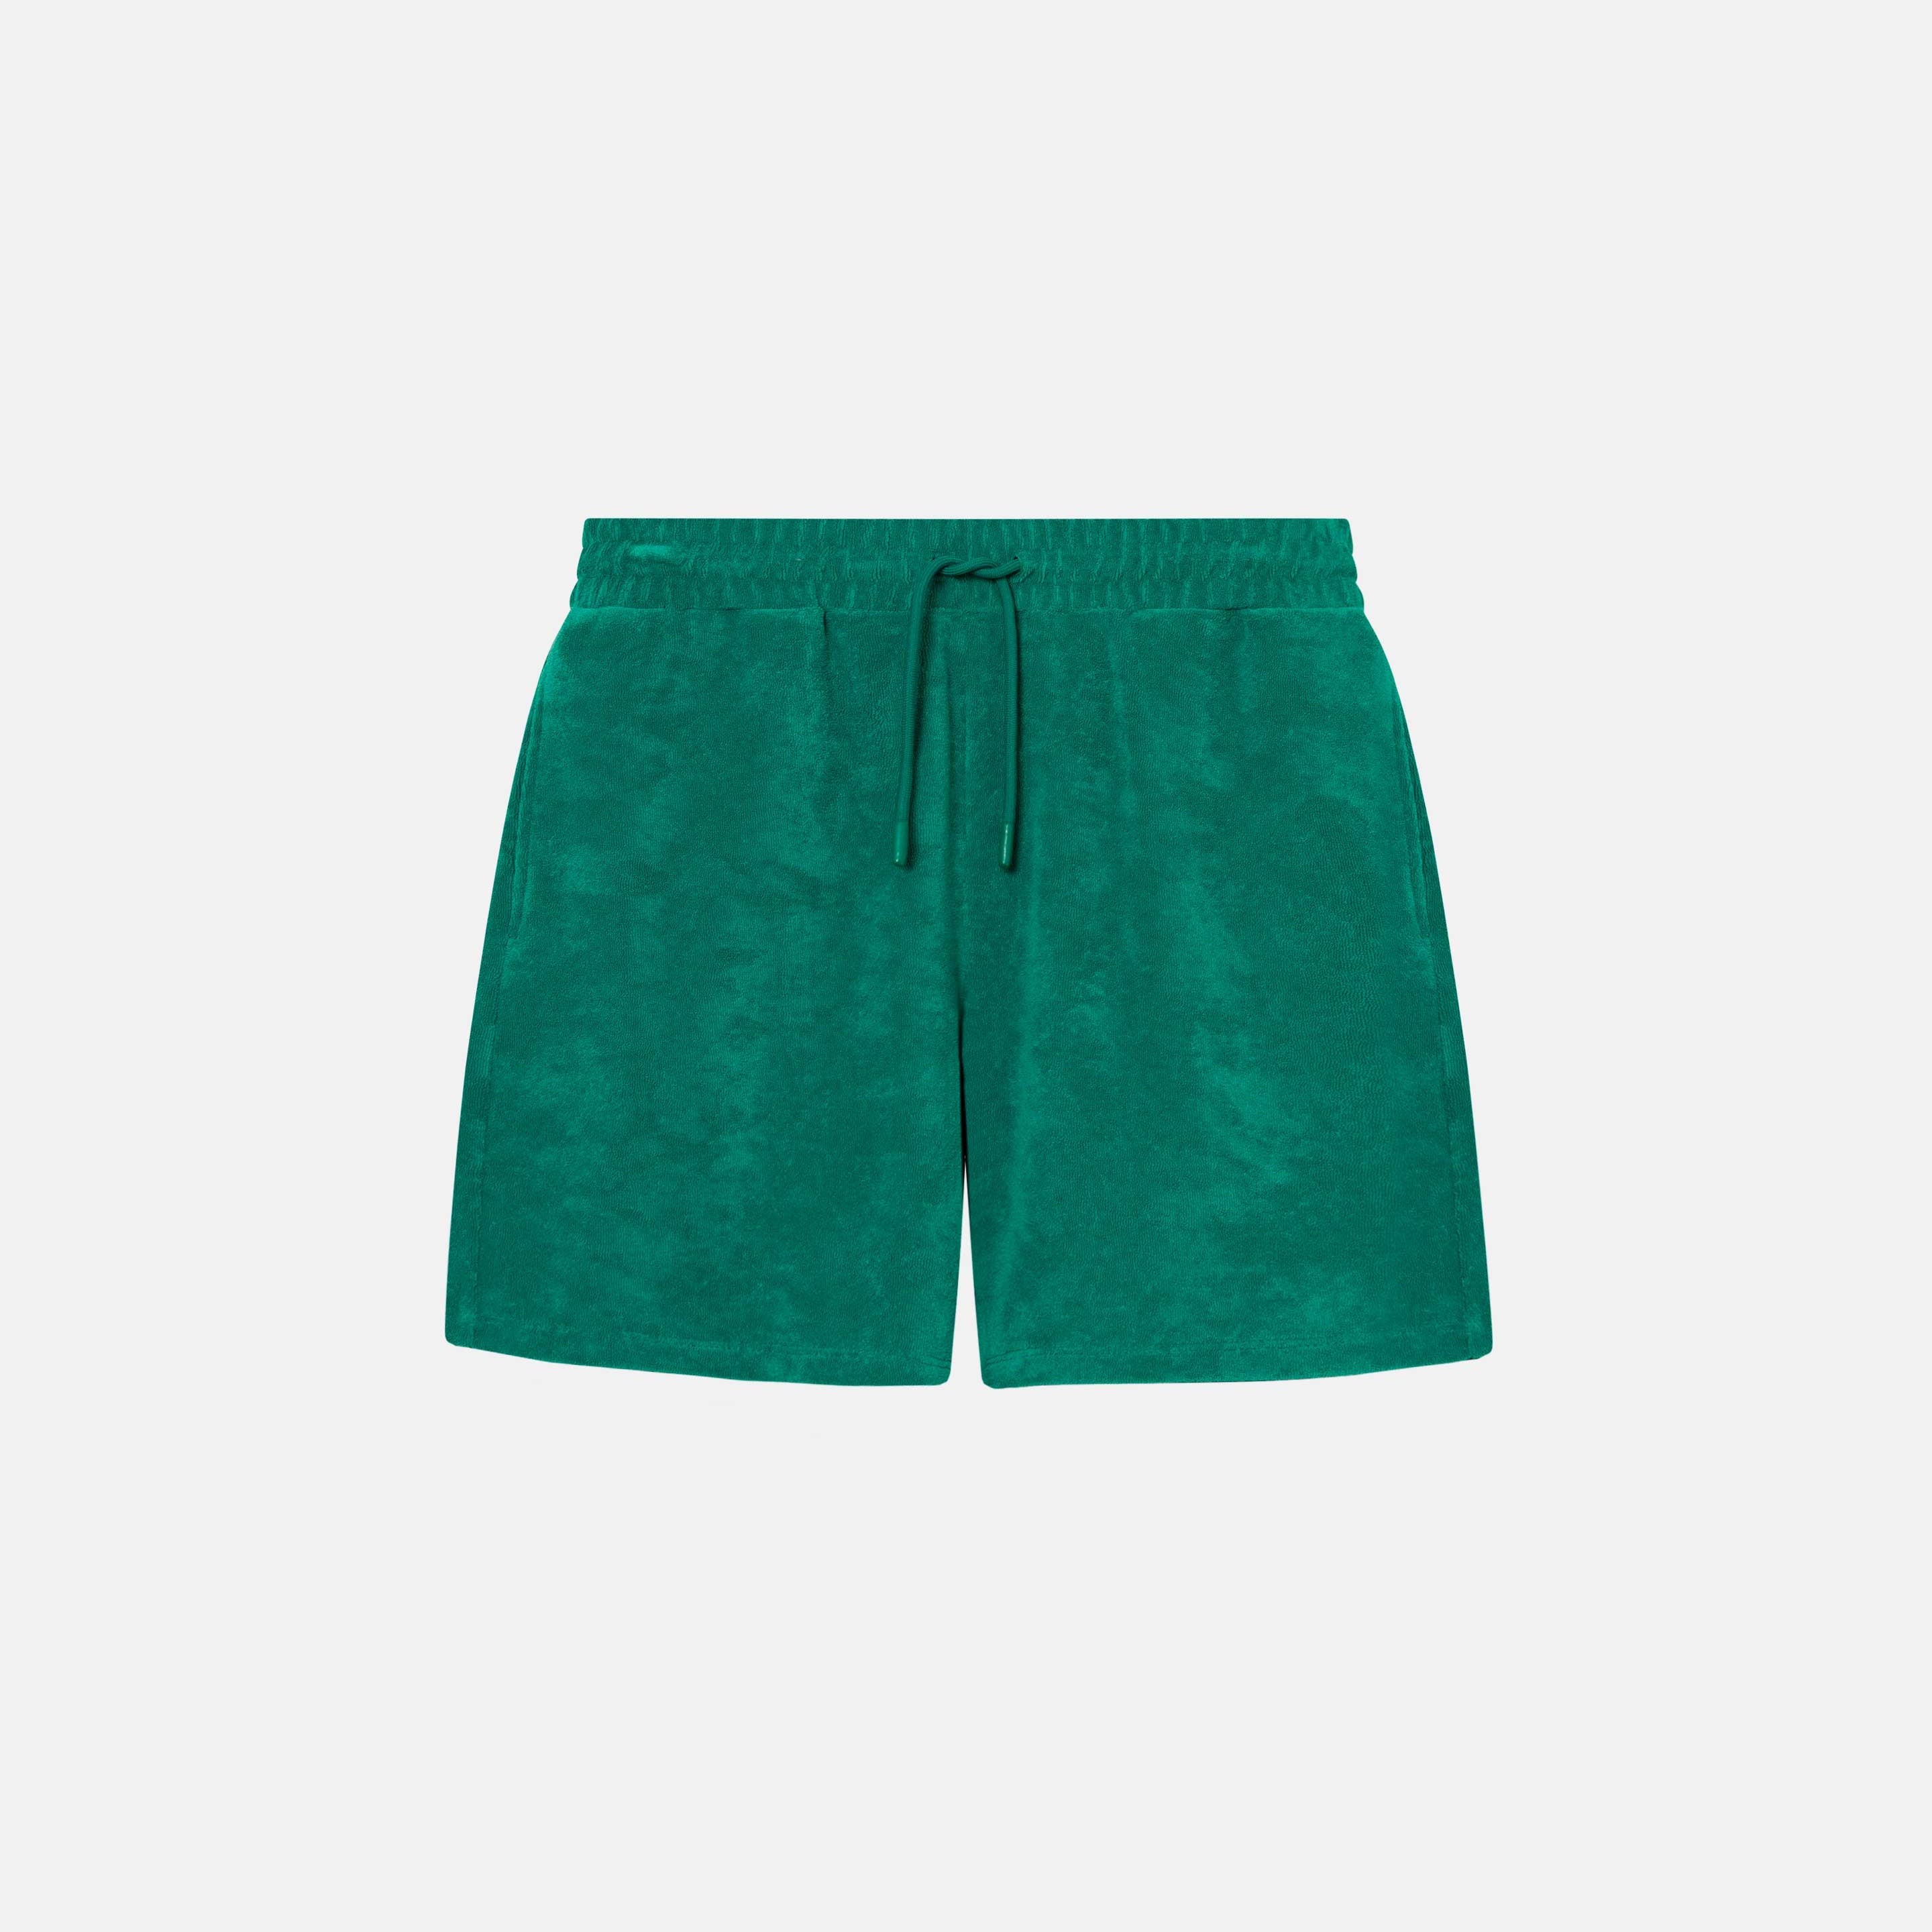 Green mid length shorts in terry toweling fabric with drawdtring and two side pockets.